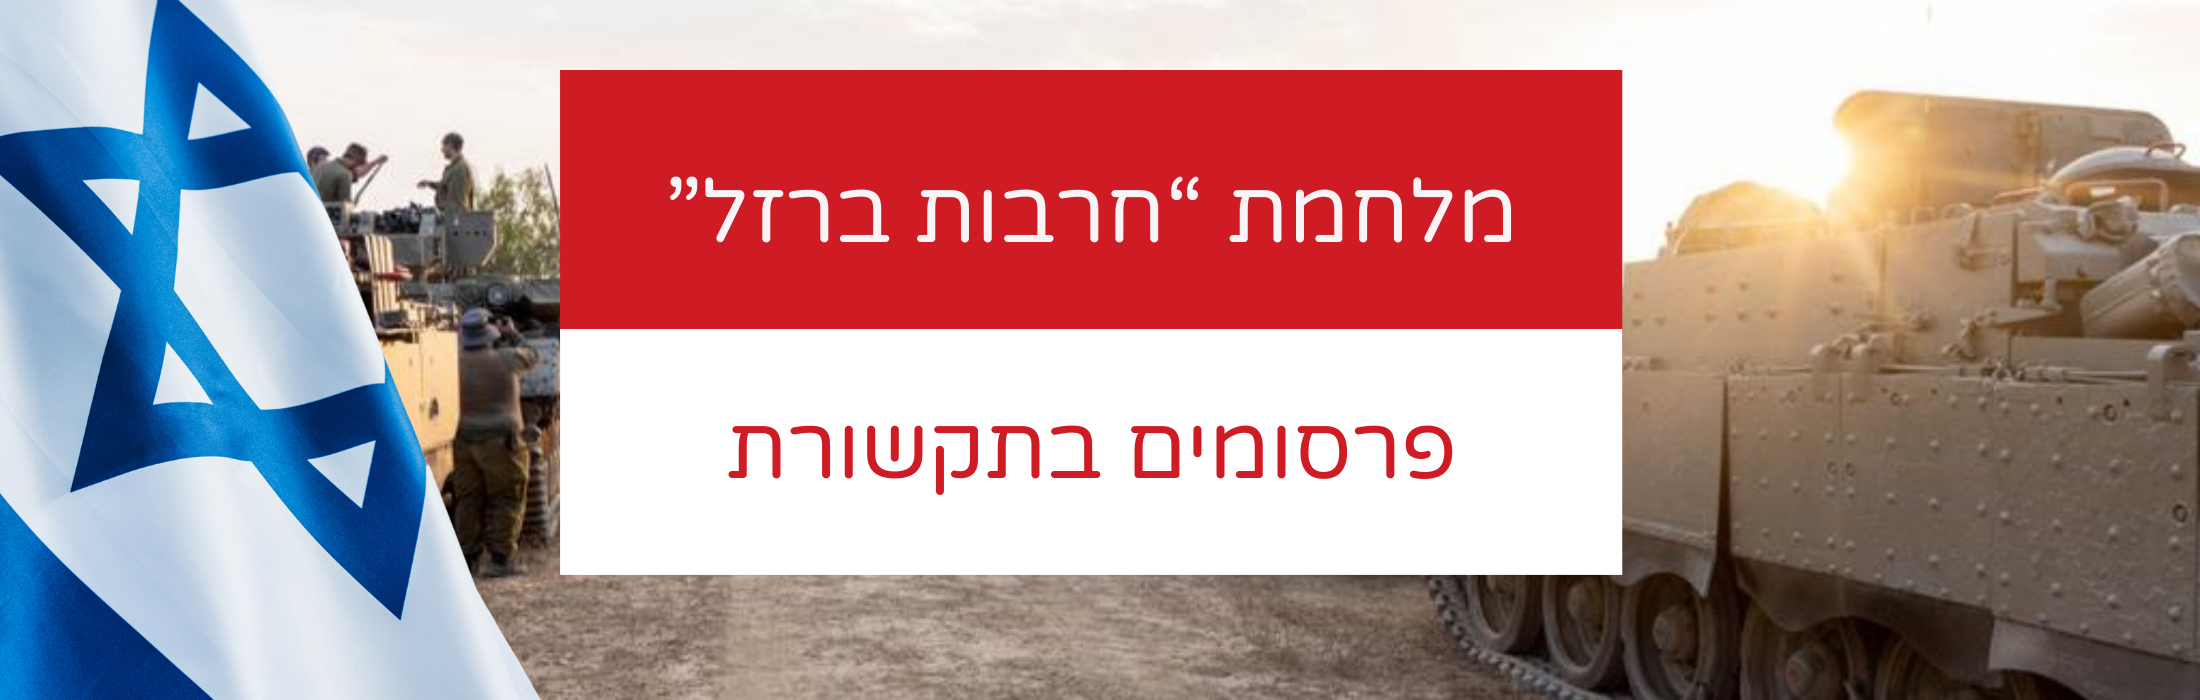 Red Black Modern Colorful Company Newsletter (2200 x 700 פיקסל) (8)